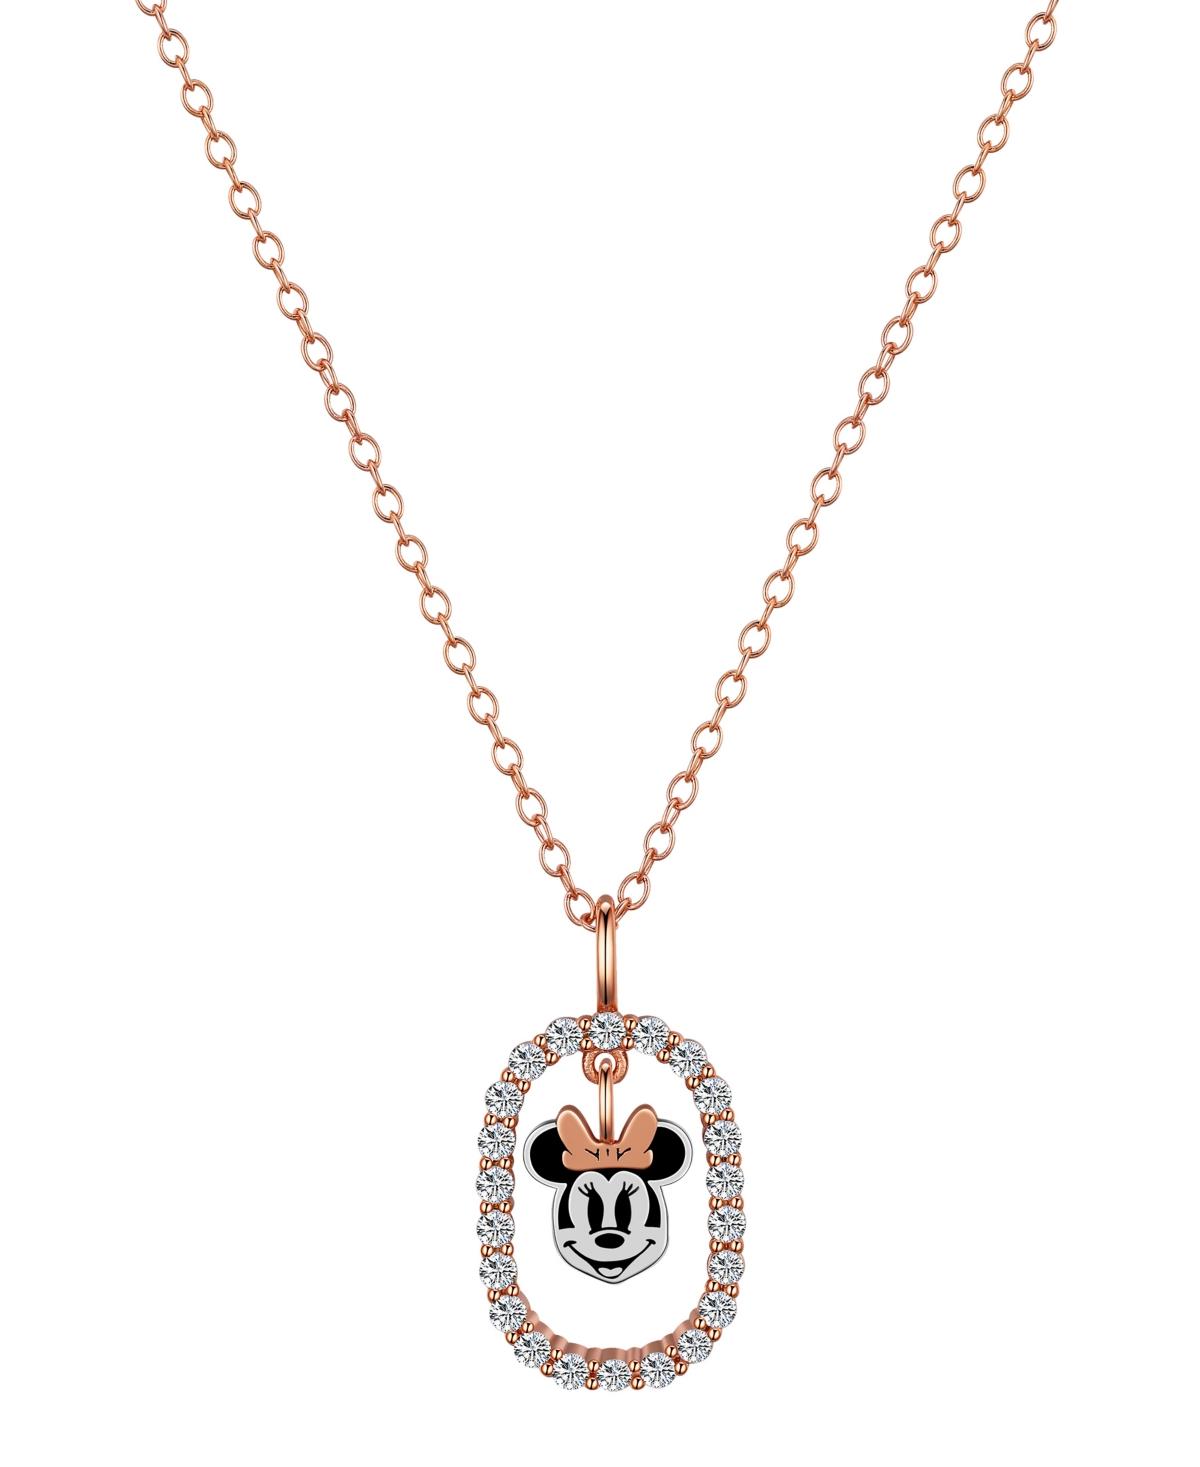 Minnie Mouse 925 Sterling Silver pendant w/ necklace | Chow Tai Fook eShop  | Find the perfect jewellery for you and your loved ones